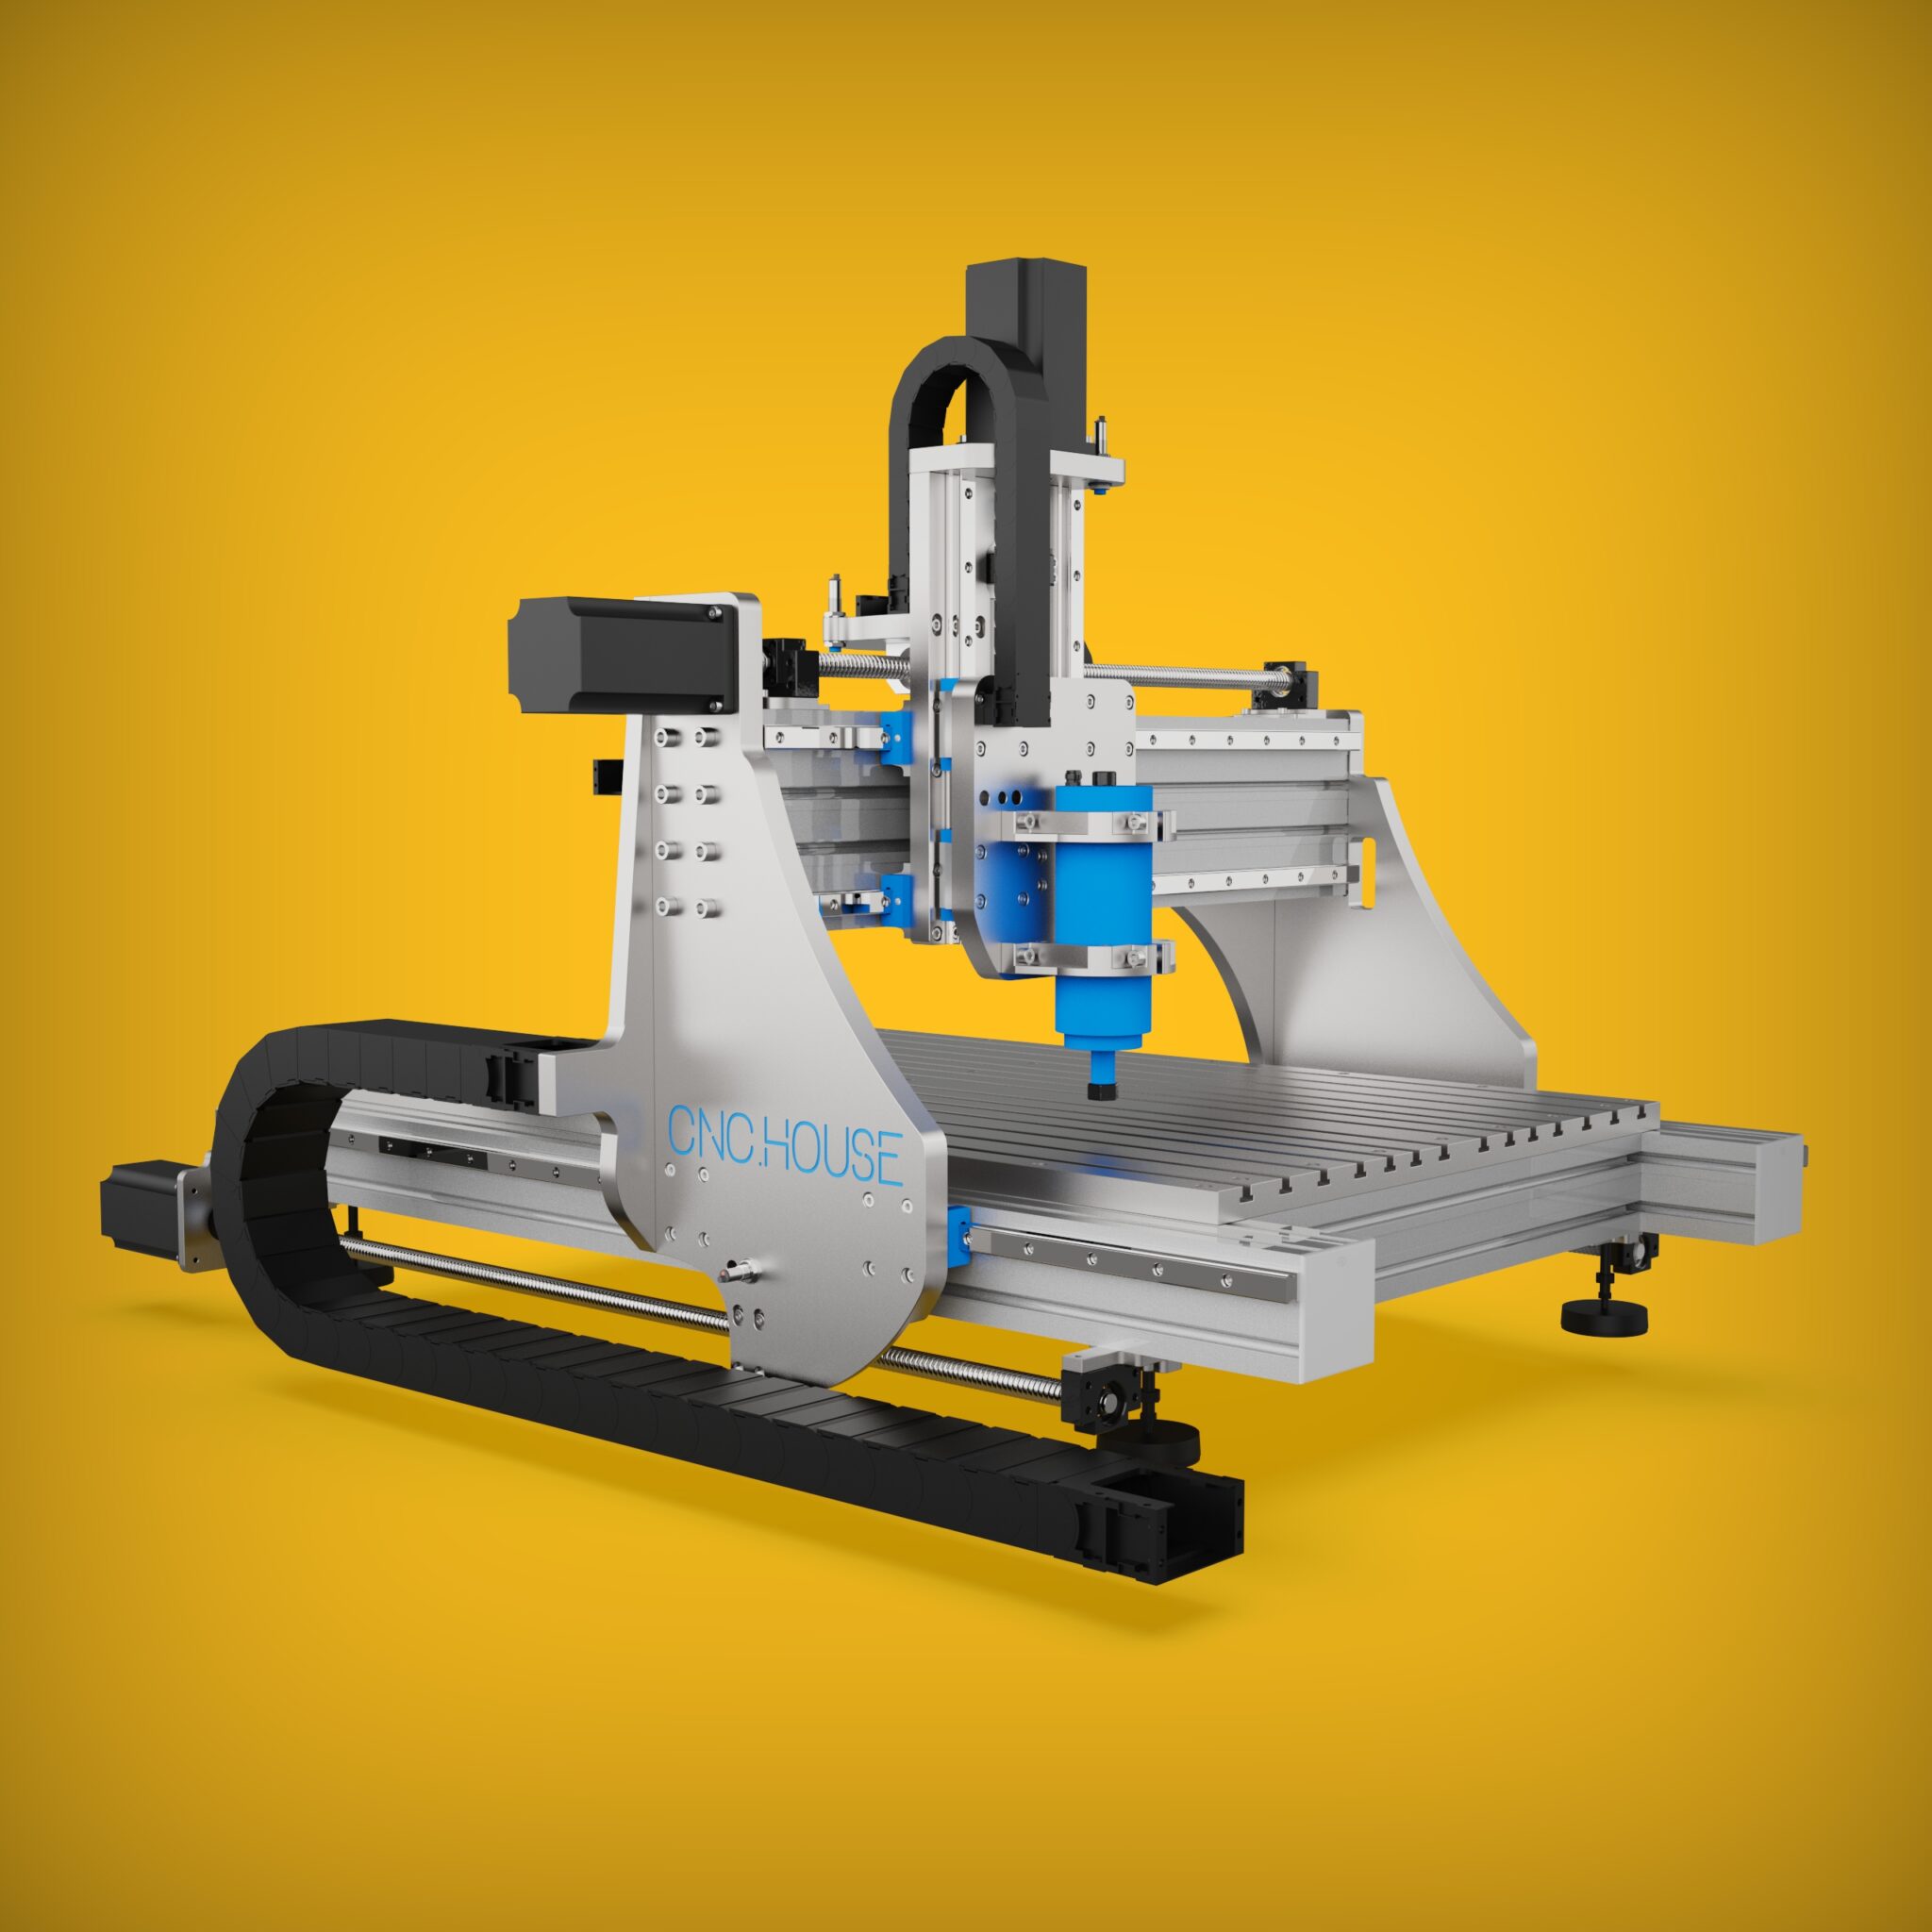 Pro Line CNC Milling Machine 3D Model: Industrial-Strength Precision for DIY Assembly